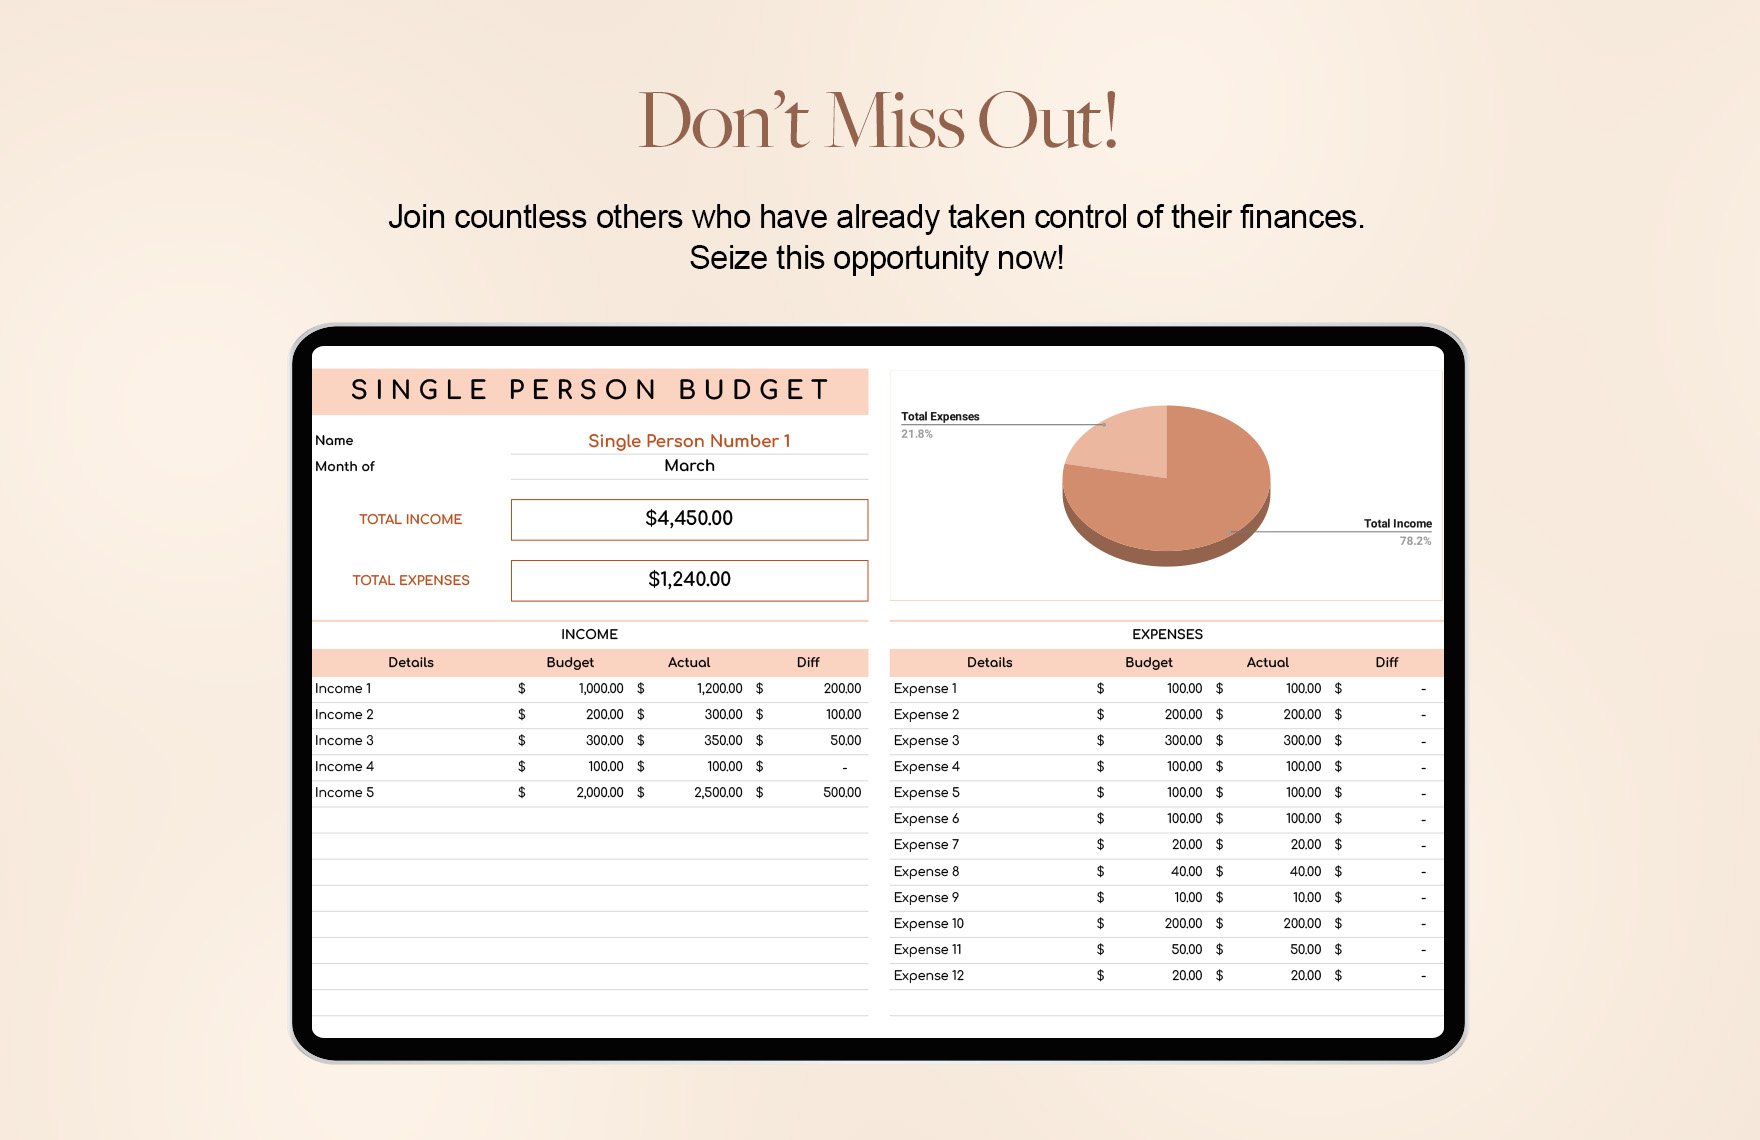 Single Person Budget Template